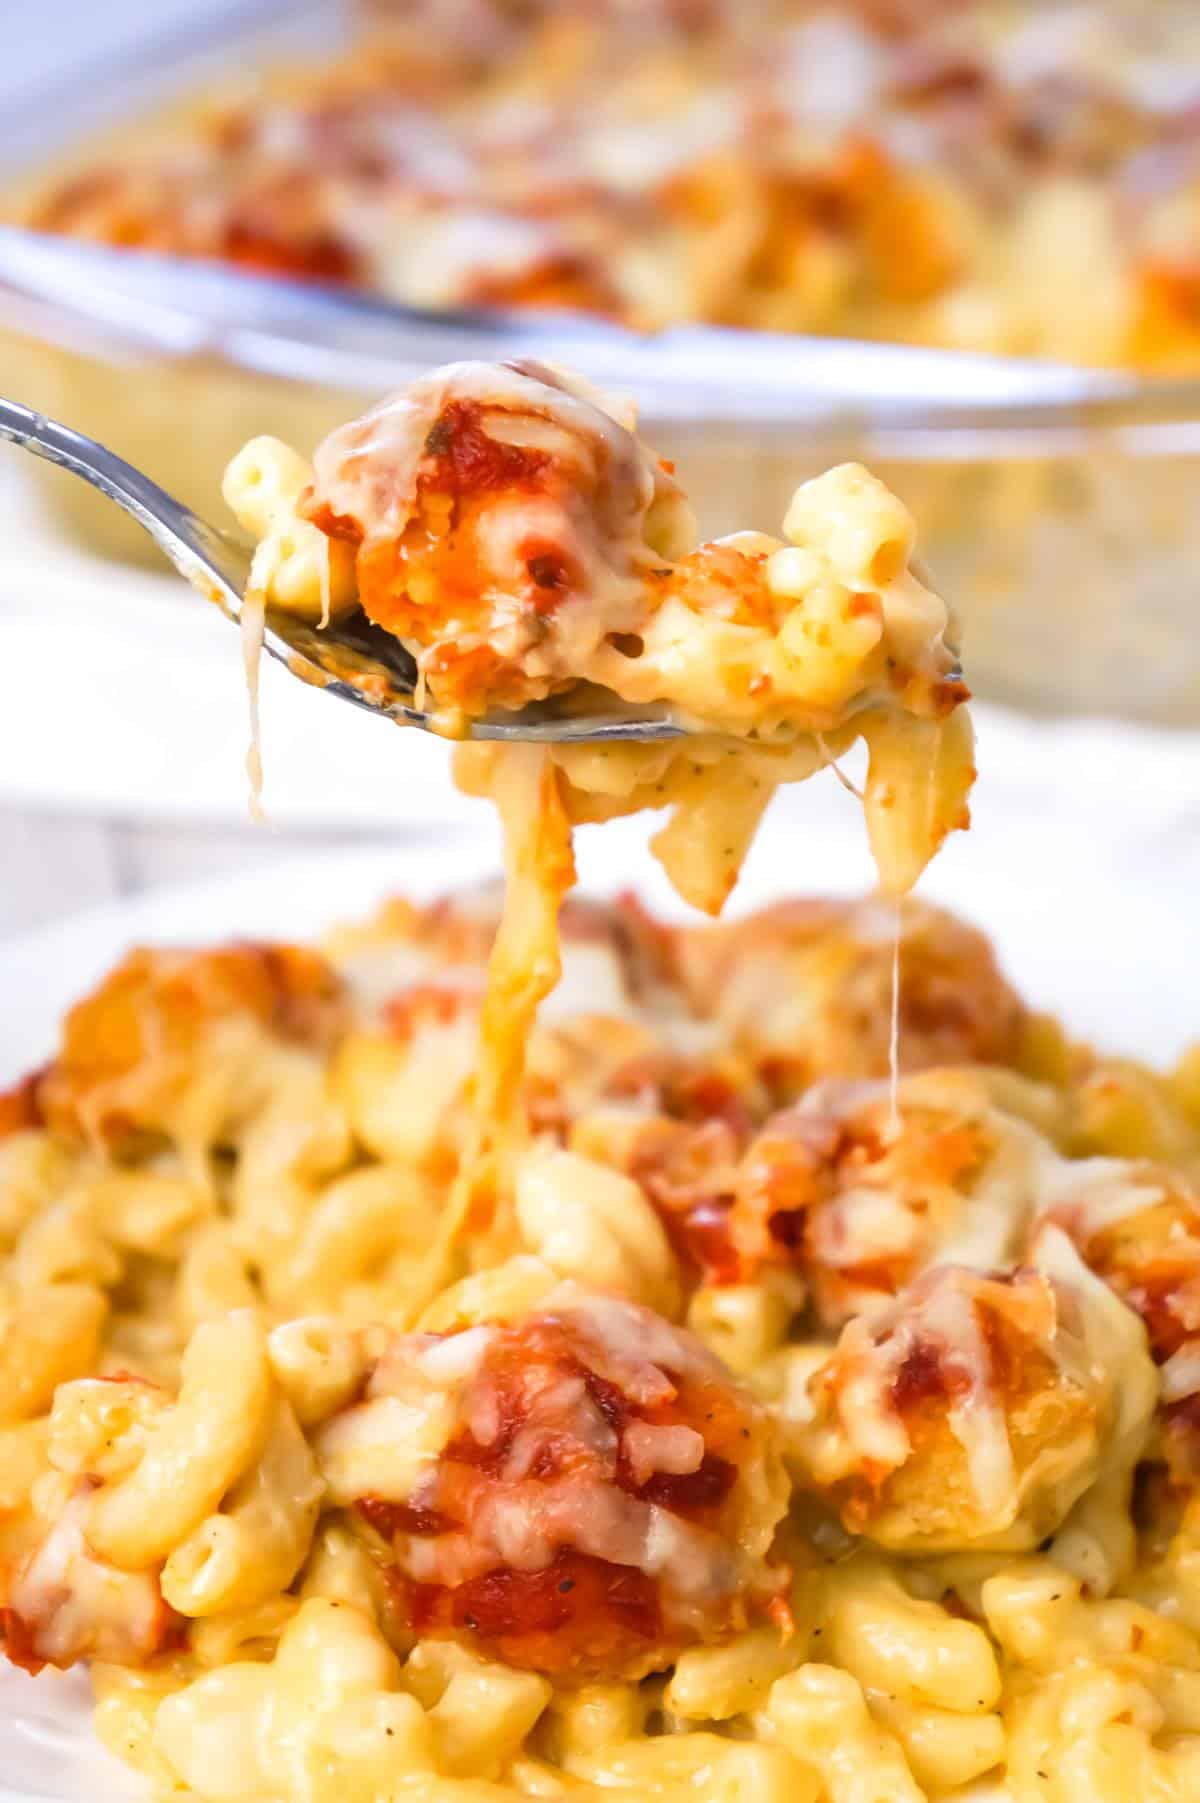 Chicken Parmesan Mac and Cheese is a hearty baked pasta recipe with a base of macaroni and cheese topped with popcorn chicken, marinara sauce and mozzarella cheese.